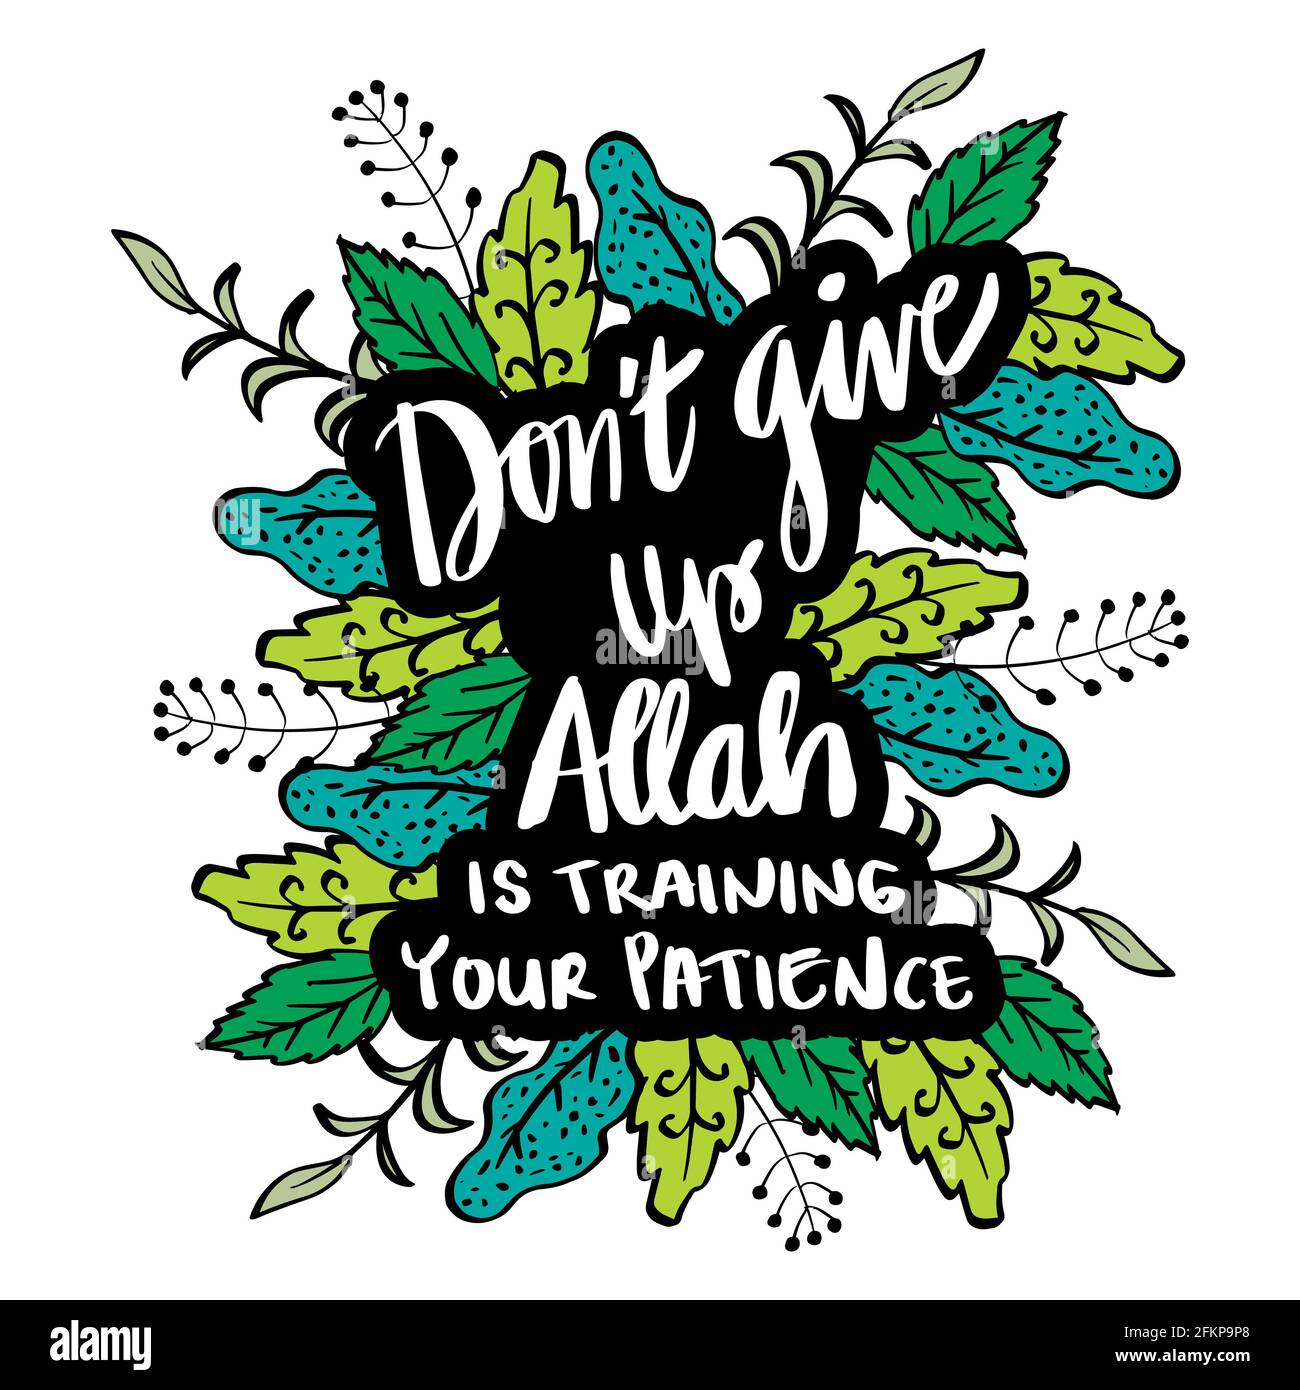 Don't give up Allah is training your patience. Islamic quote. Stock Photo